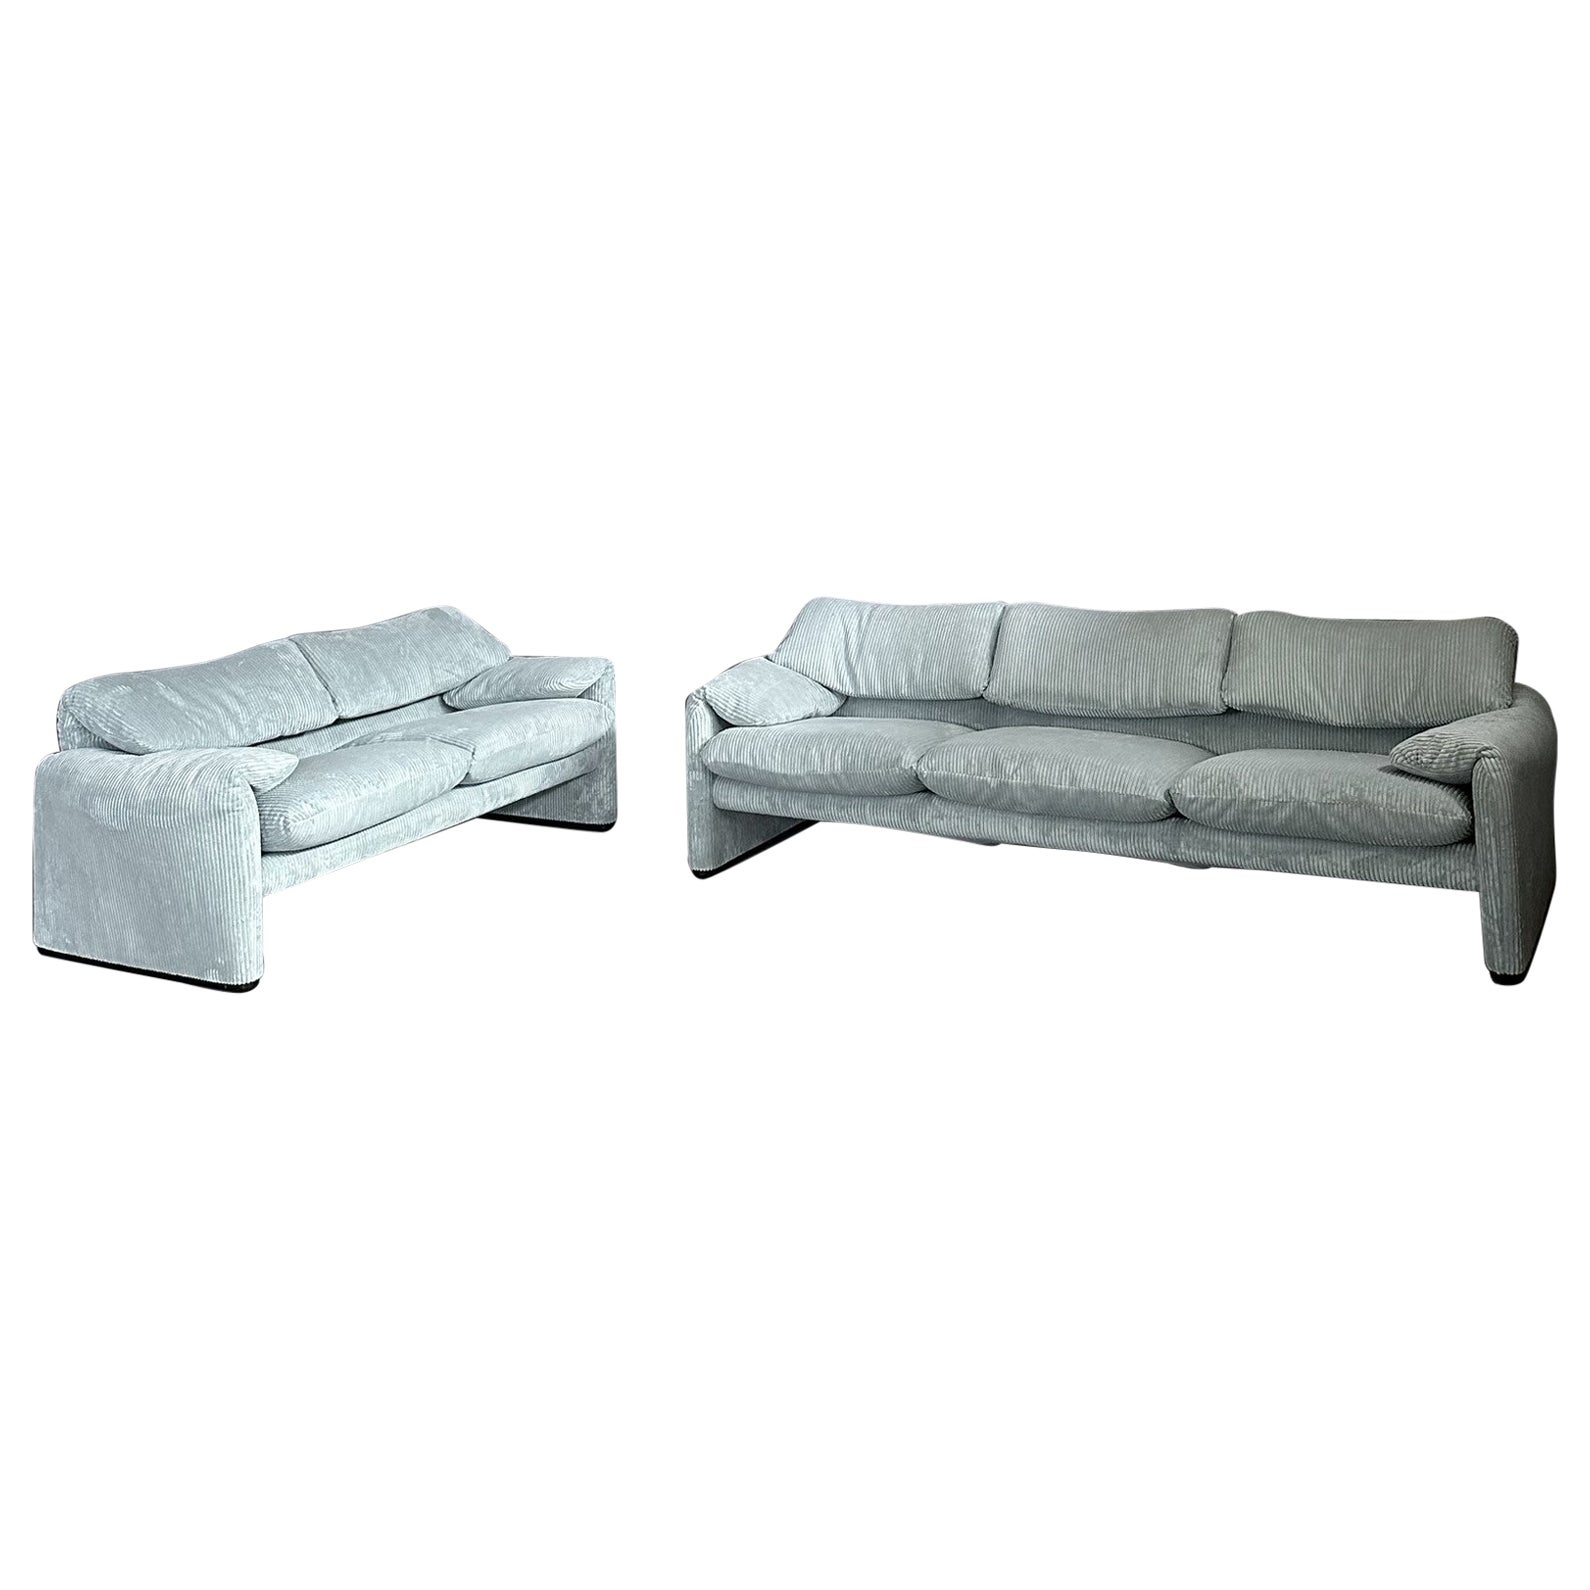 Pair of Maralunga sofas design by Vico Magistretti for Cassina 2seater - 3seater